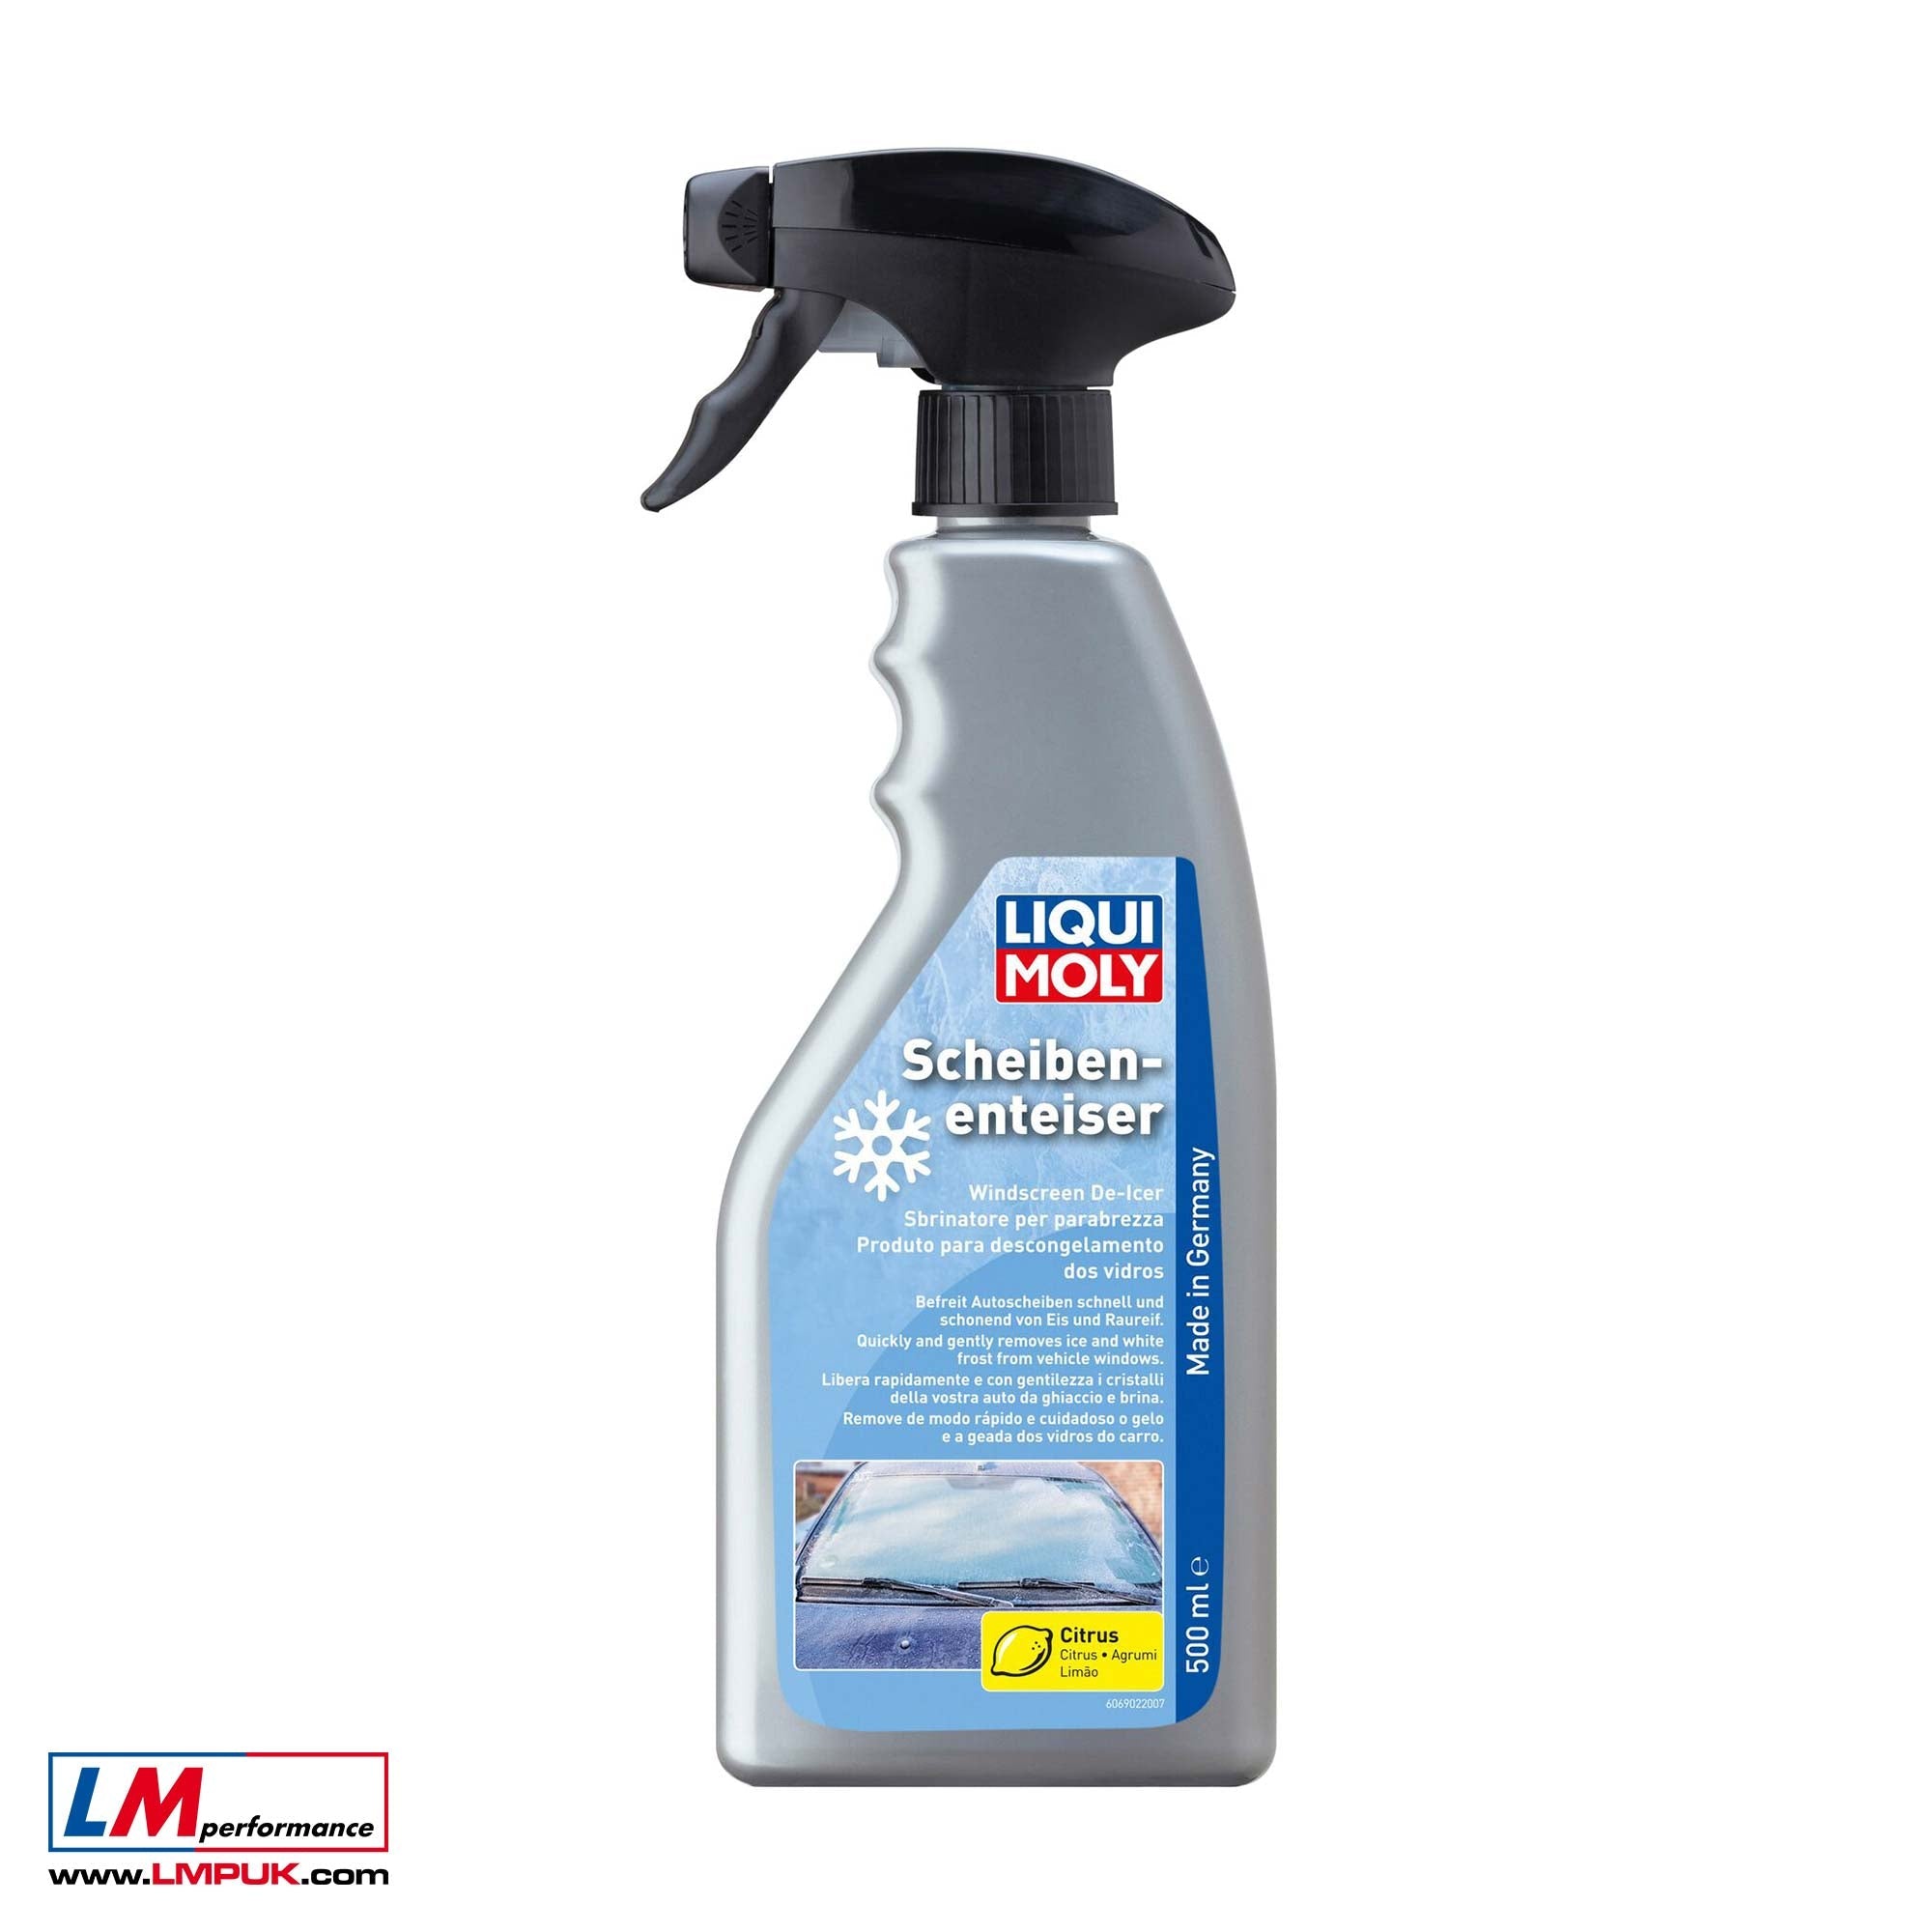 Windshield De-Icer by LIQUI MOLY – LM Performance